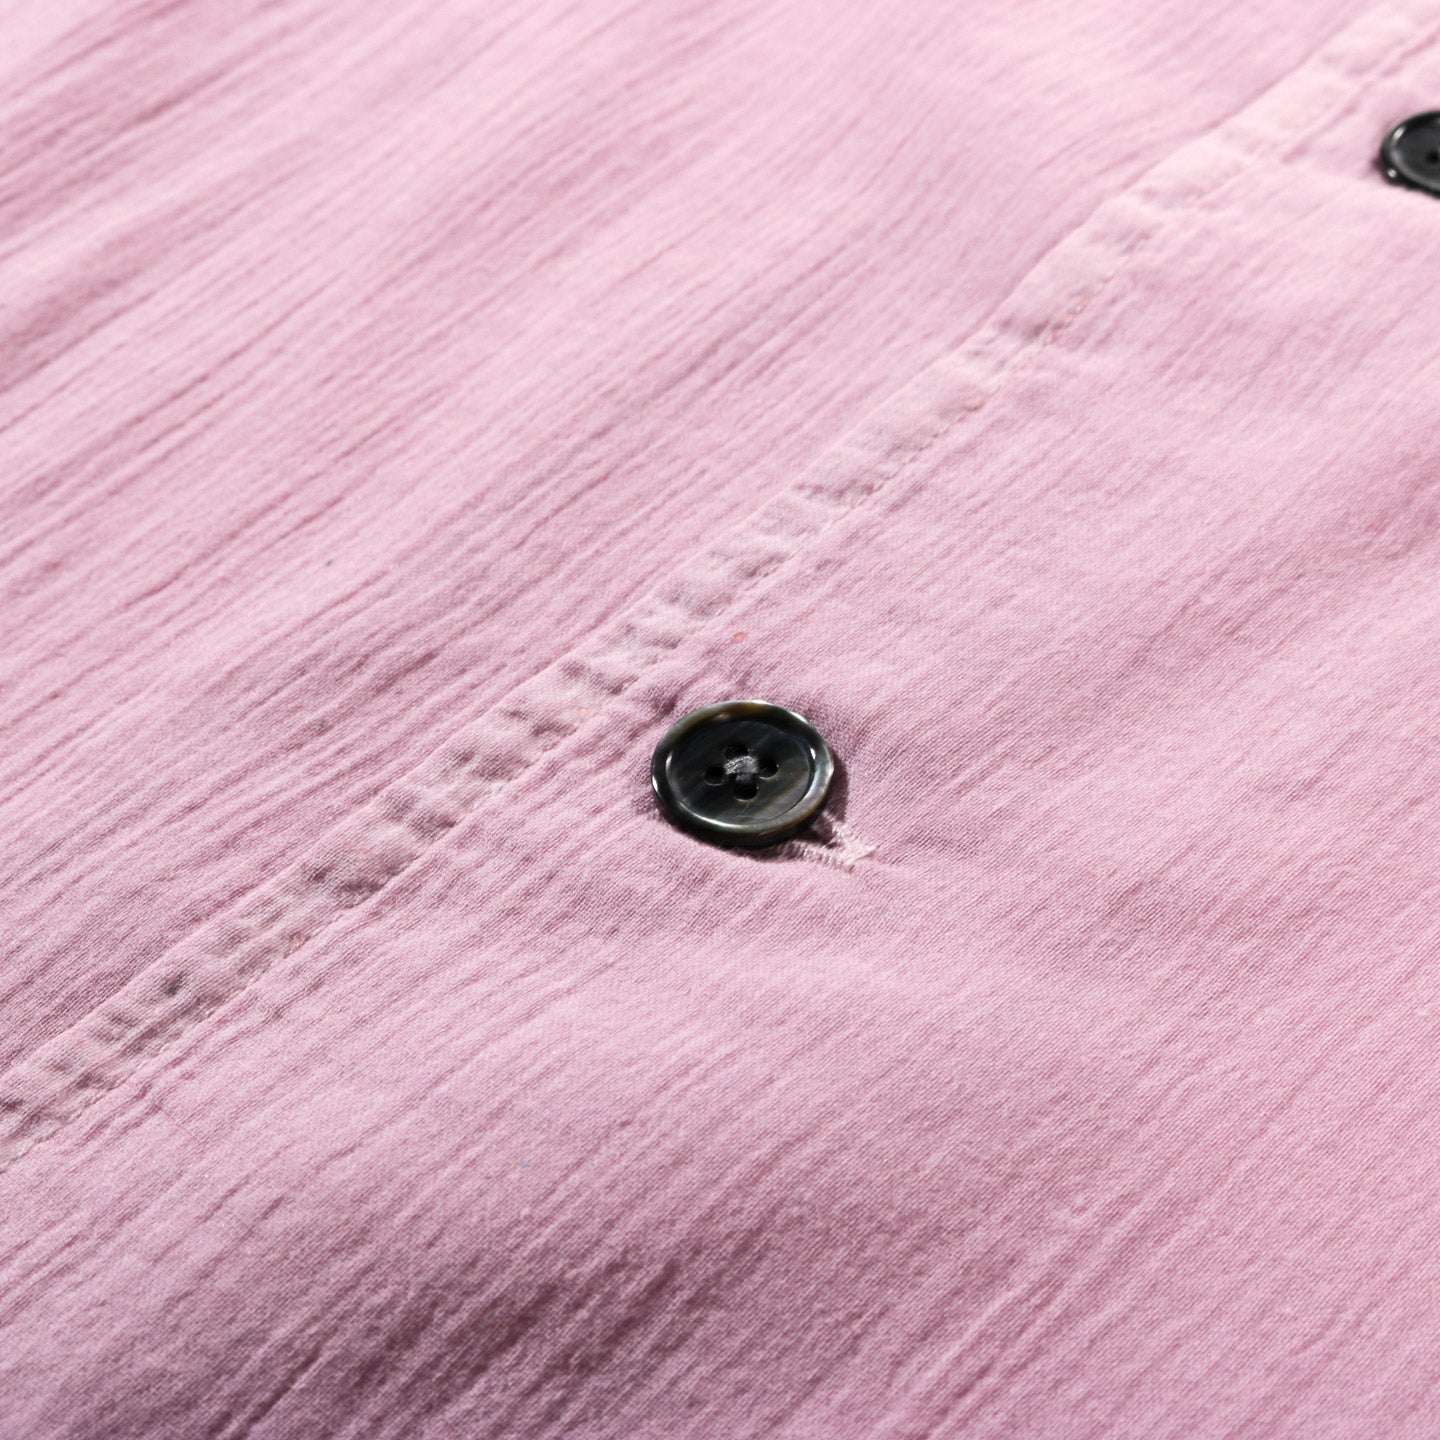 OUR LEGACY BOX SHIRT SHORTSLEEVE DUSTY LILAC COATED VOILE